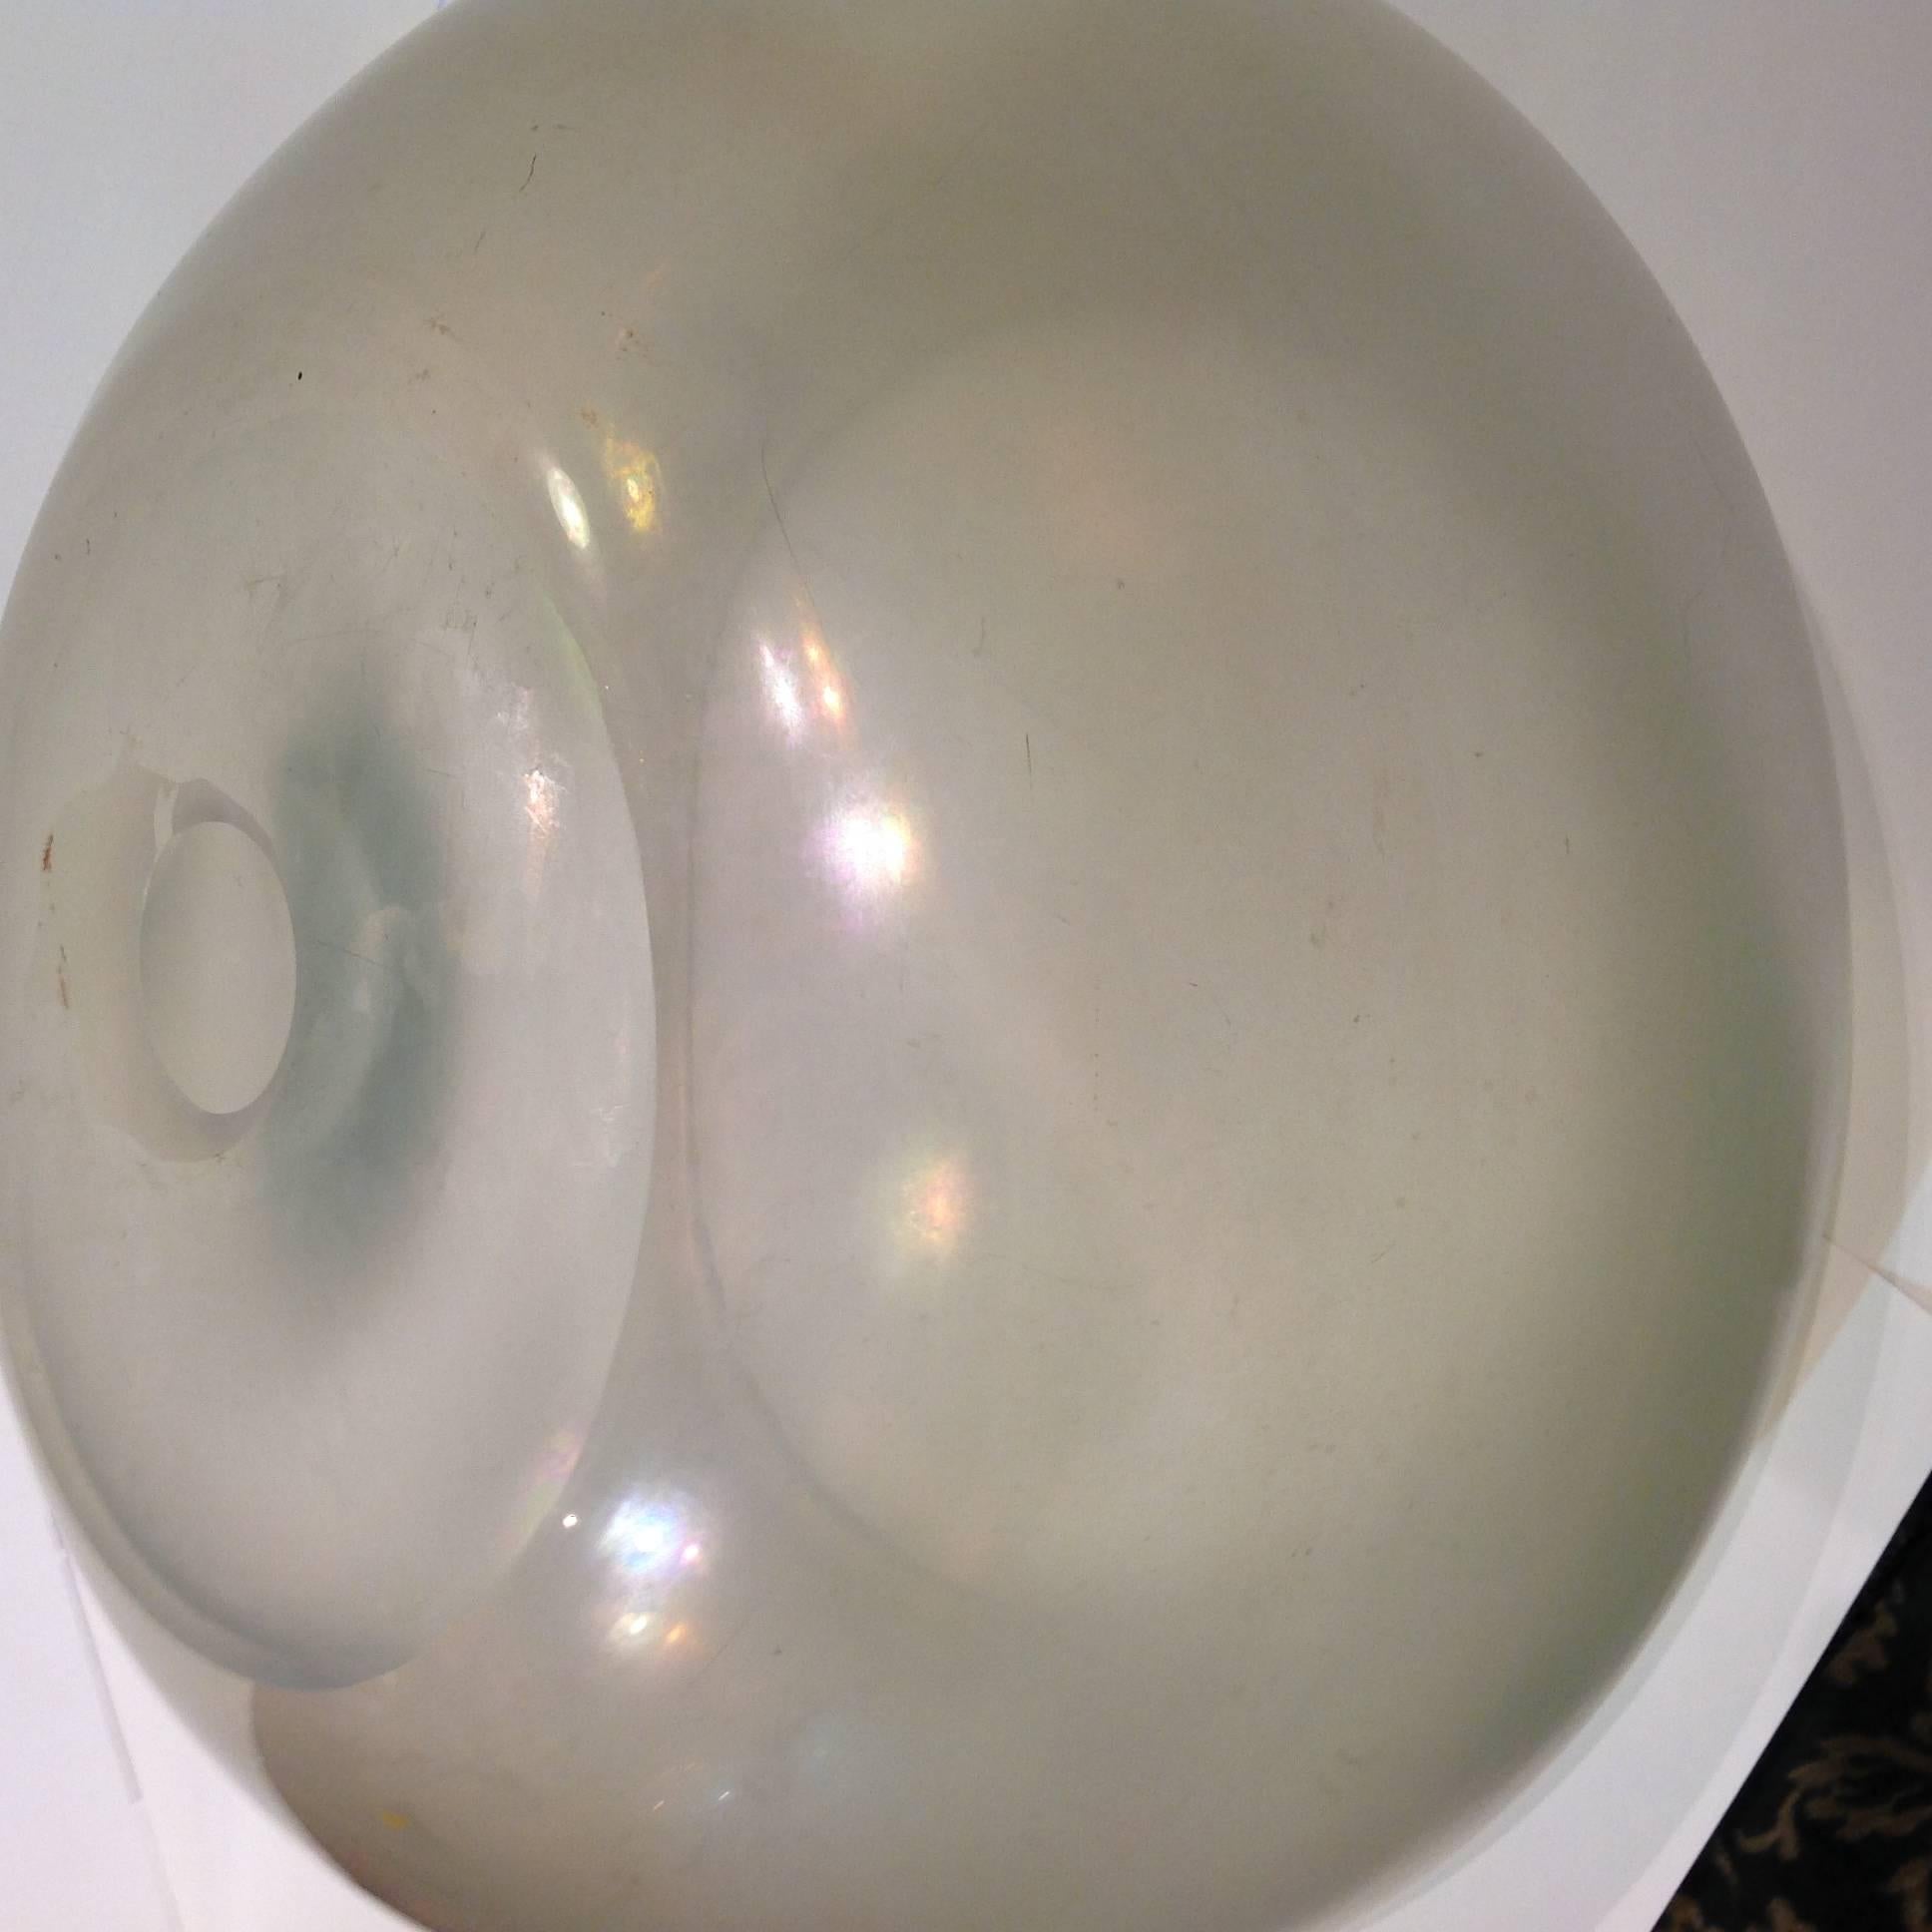 Rare Steuben verre de soie glass fish bowl measuring 18 inches in diameter.
Verre de soie glass is iridescent in white to pale green.
Frederick Carder first made verre de soie at the Steuben Glass Works from circa 1905 to 1930.
This piece is